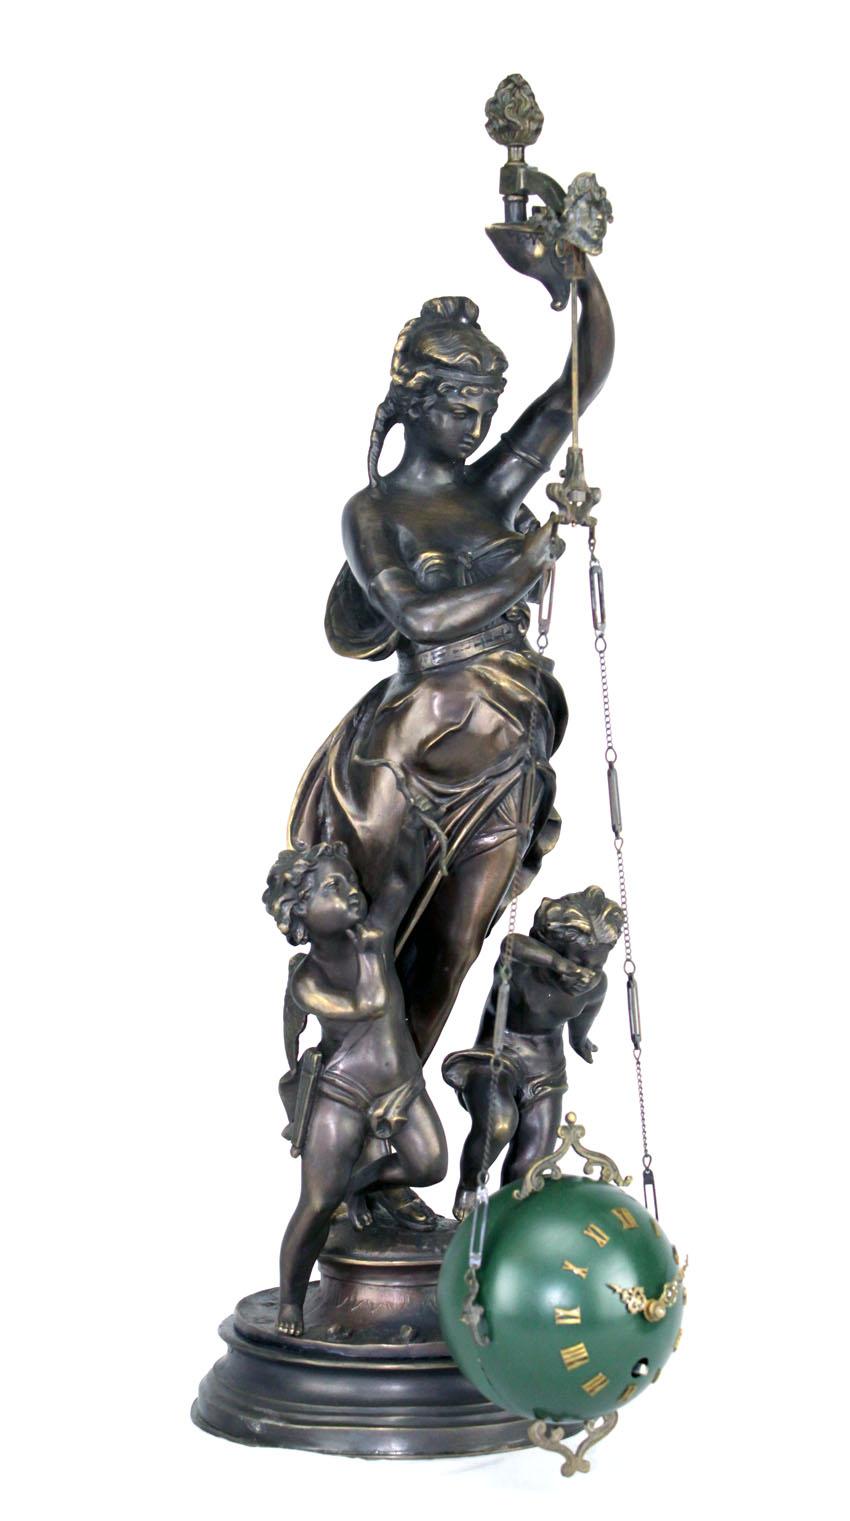 Rare Mystery Brass Lady Cherub Upside Down Chain Ball Swinging Clock

An excellent tall lady double cherub statue upside down ball swinging clock. It has a mechanical movement inside the ball and hanging down from the lady's hand. Yet, as the clock